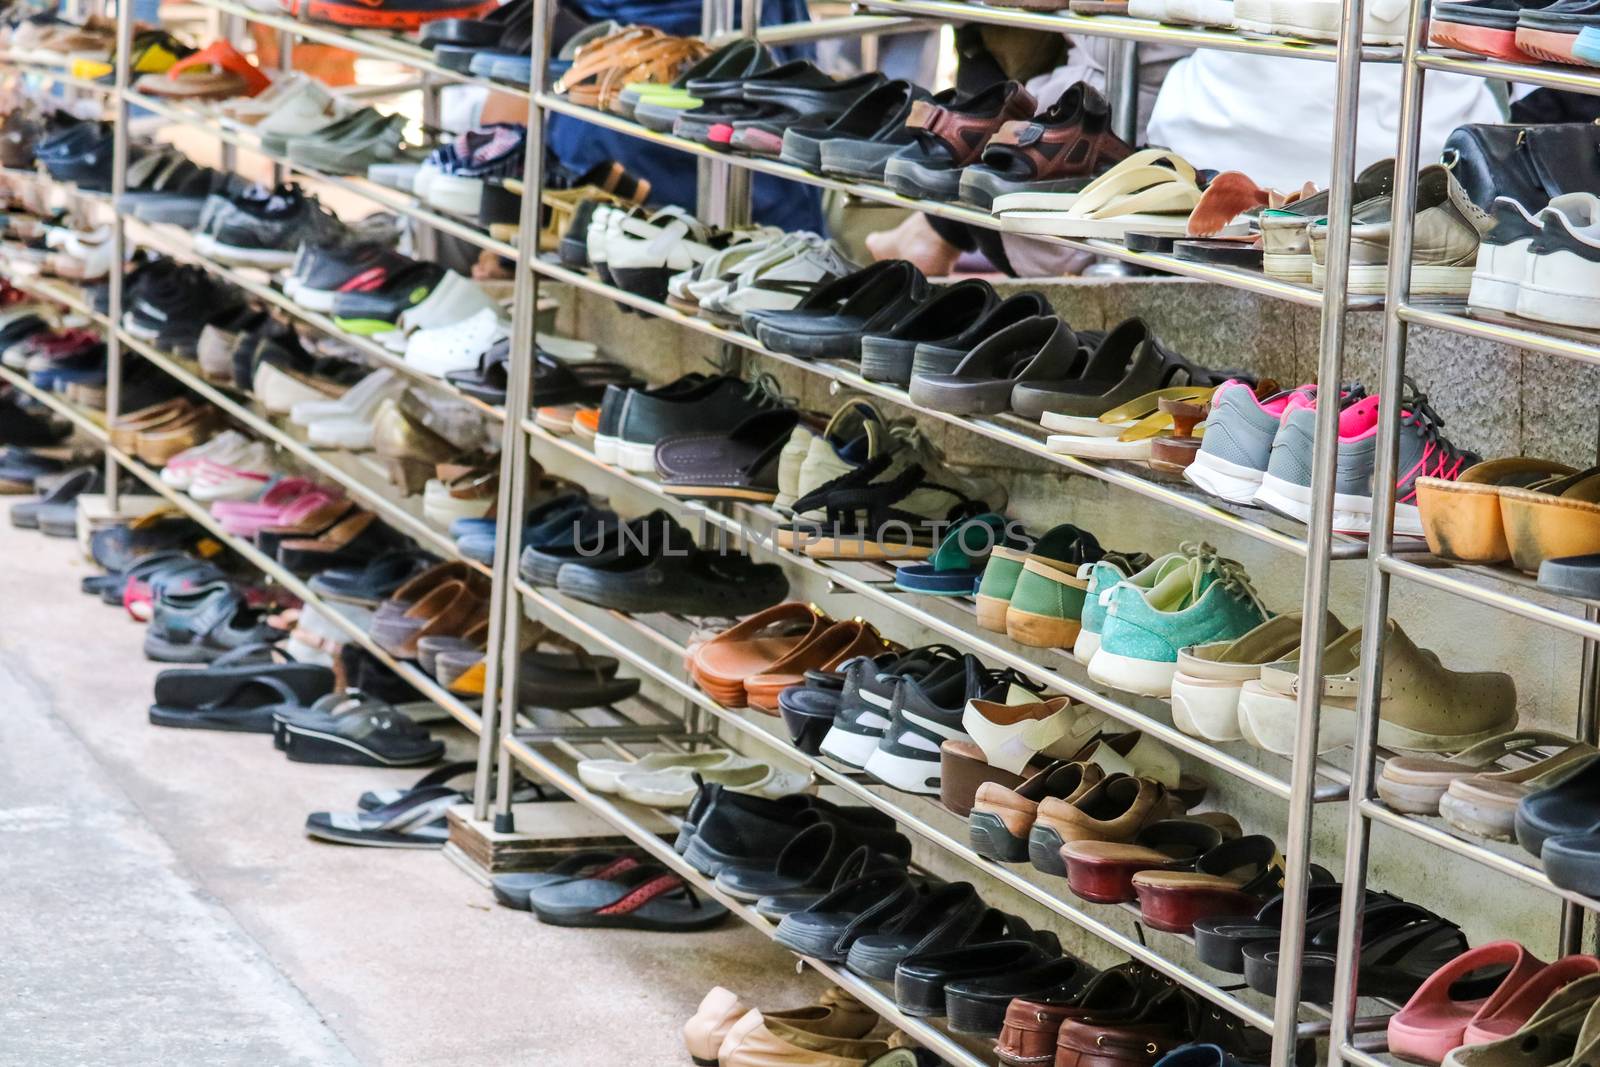 Shoes are organized in an orderly manner on the shelves inside a temple